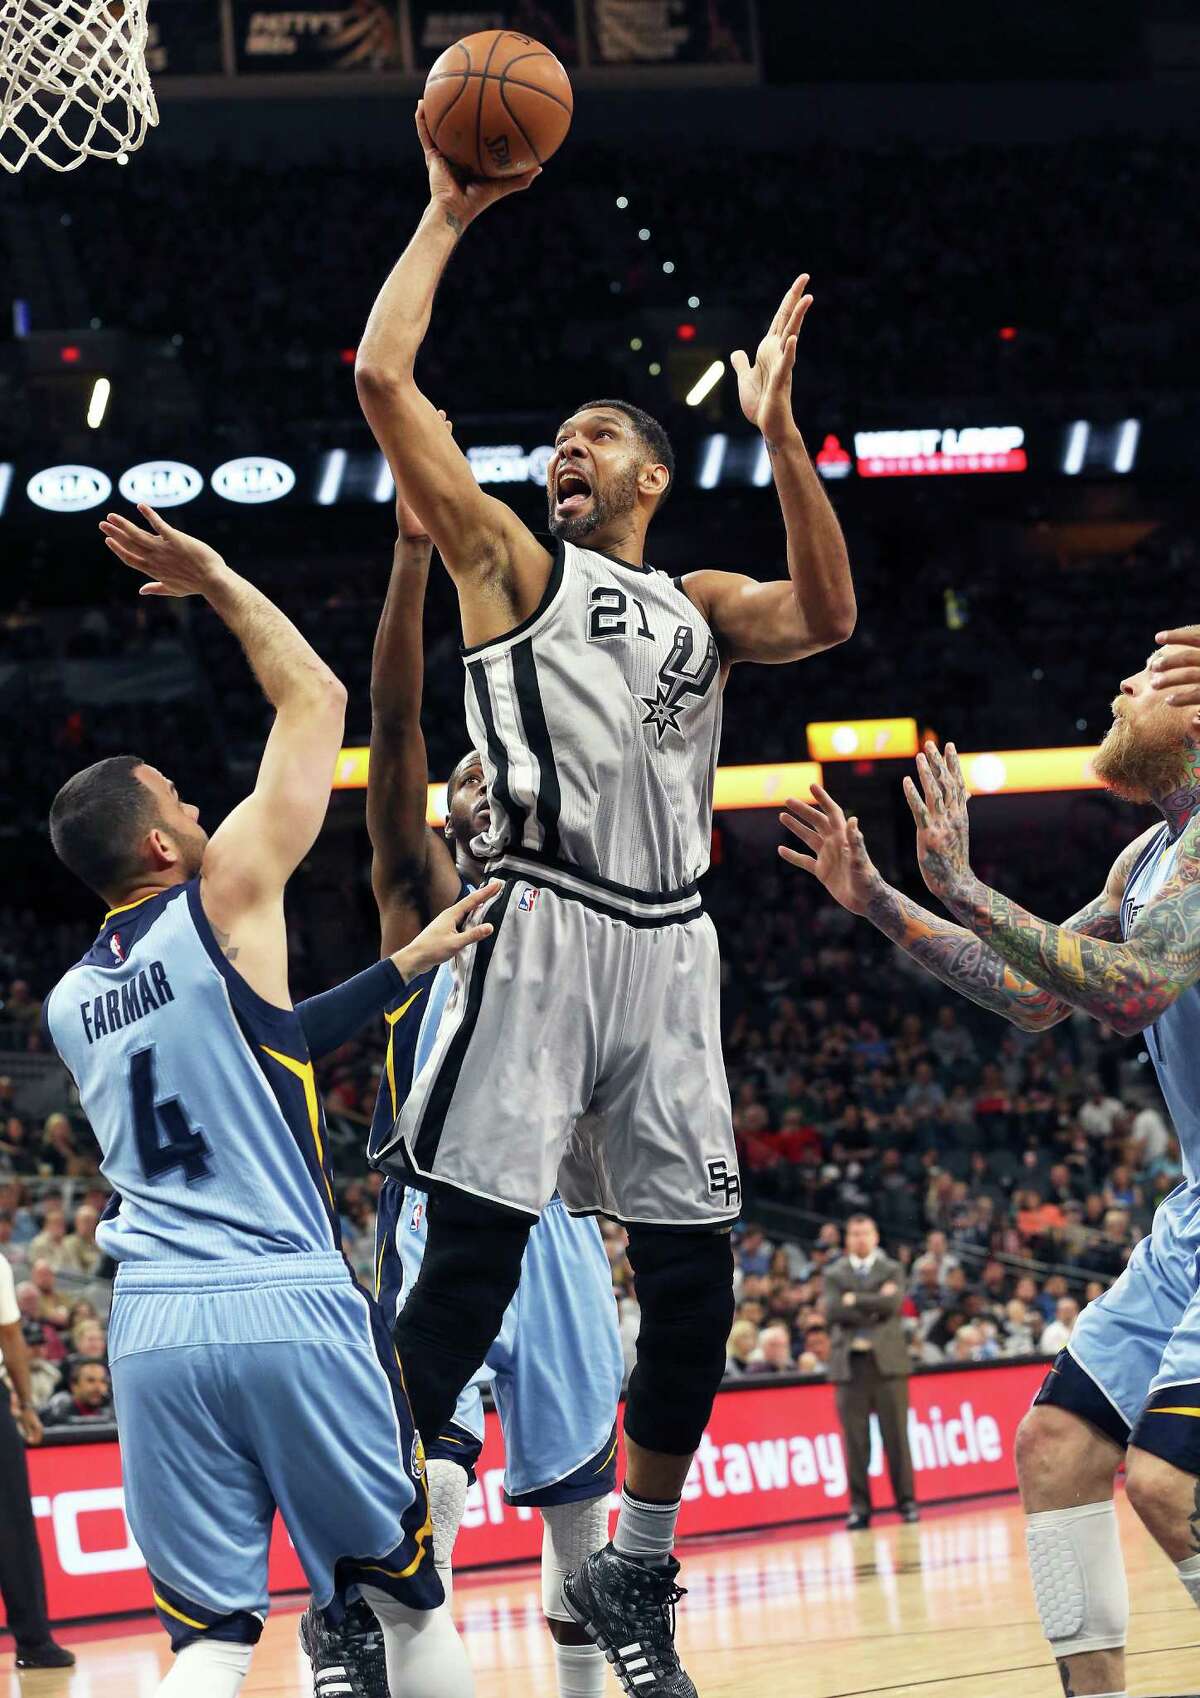 Tim Duncan gets away from Chris Andersoen and takes advantage of a mismatch with Jordan Farmar as the Spurs host the Grizzlies at the AT&T Center on March 25, 2016.